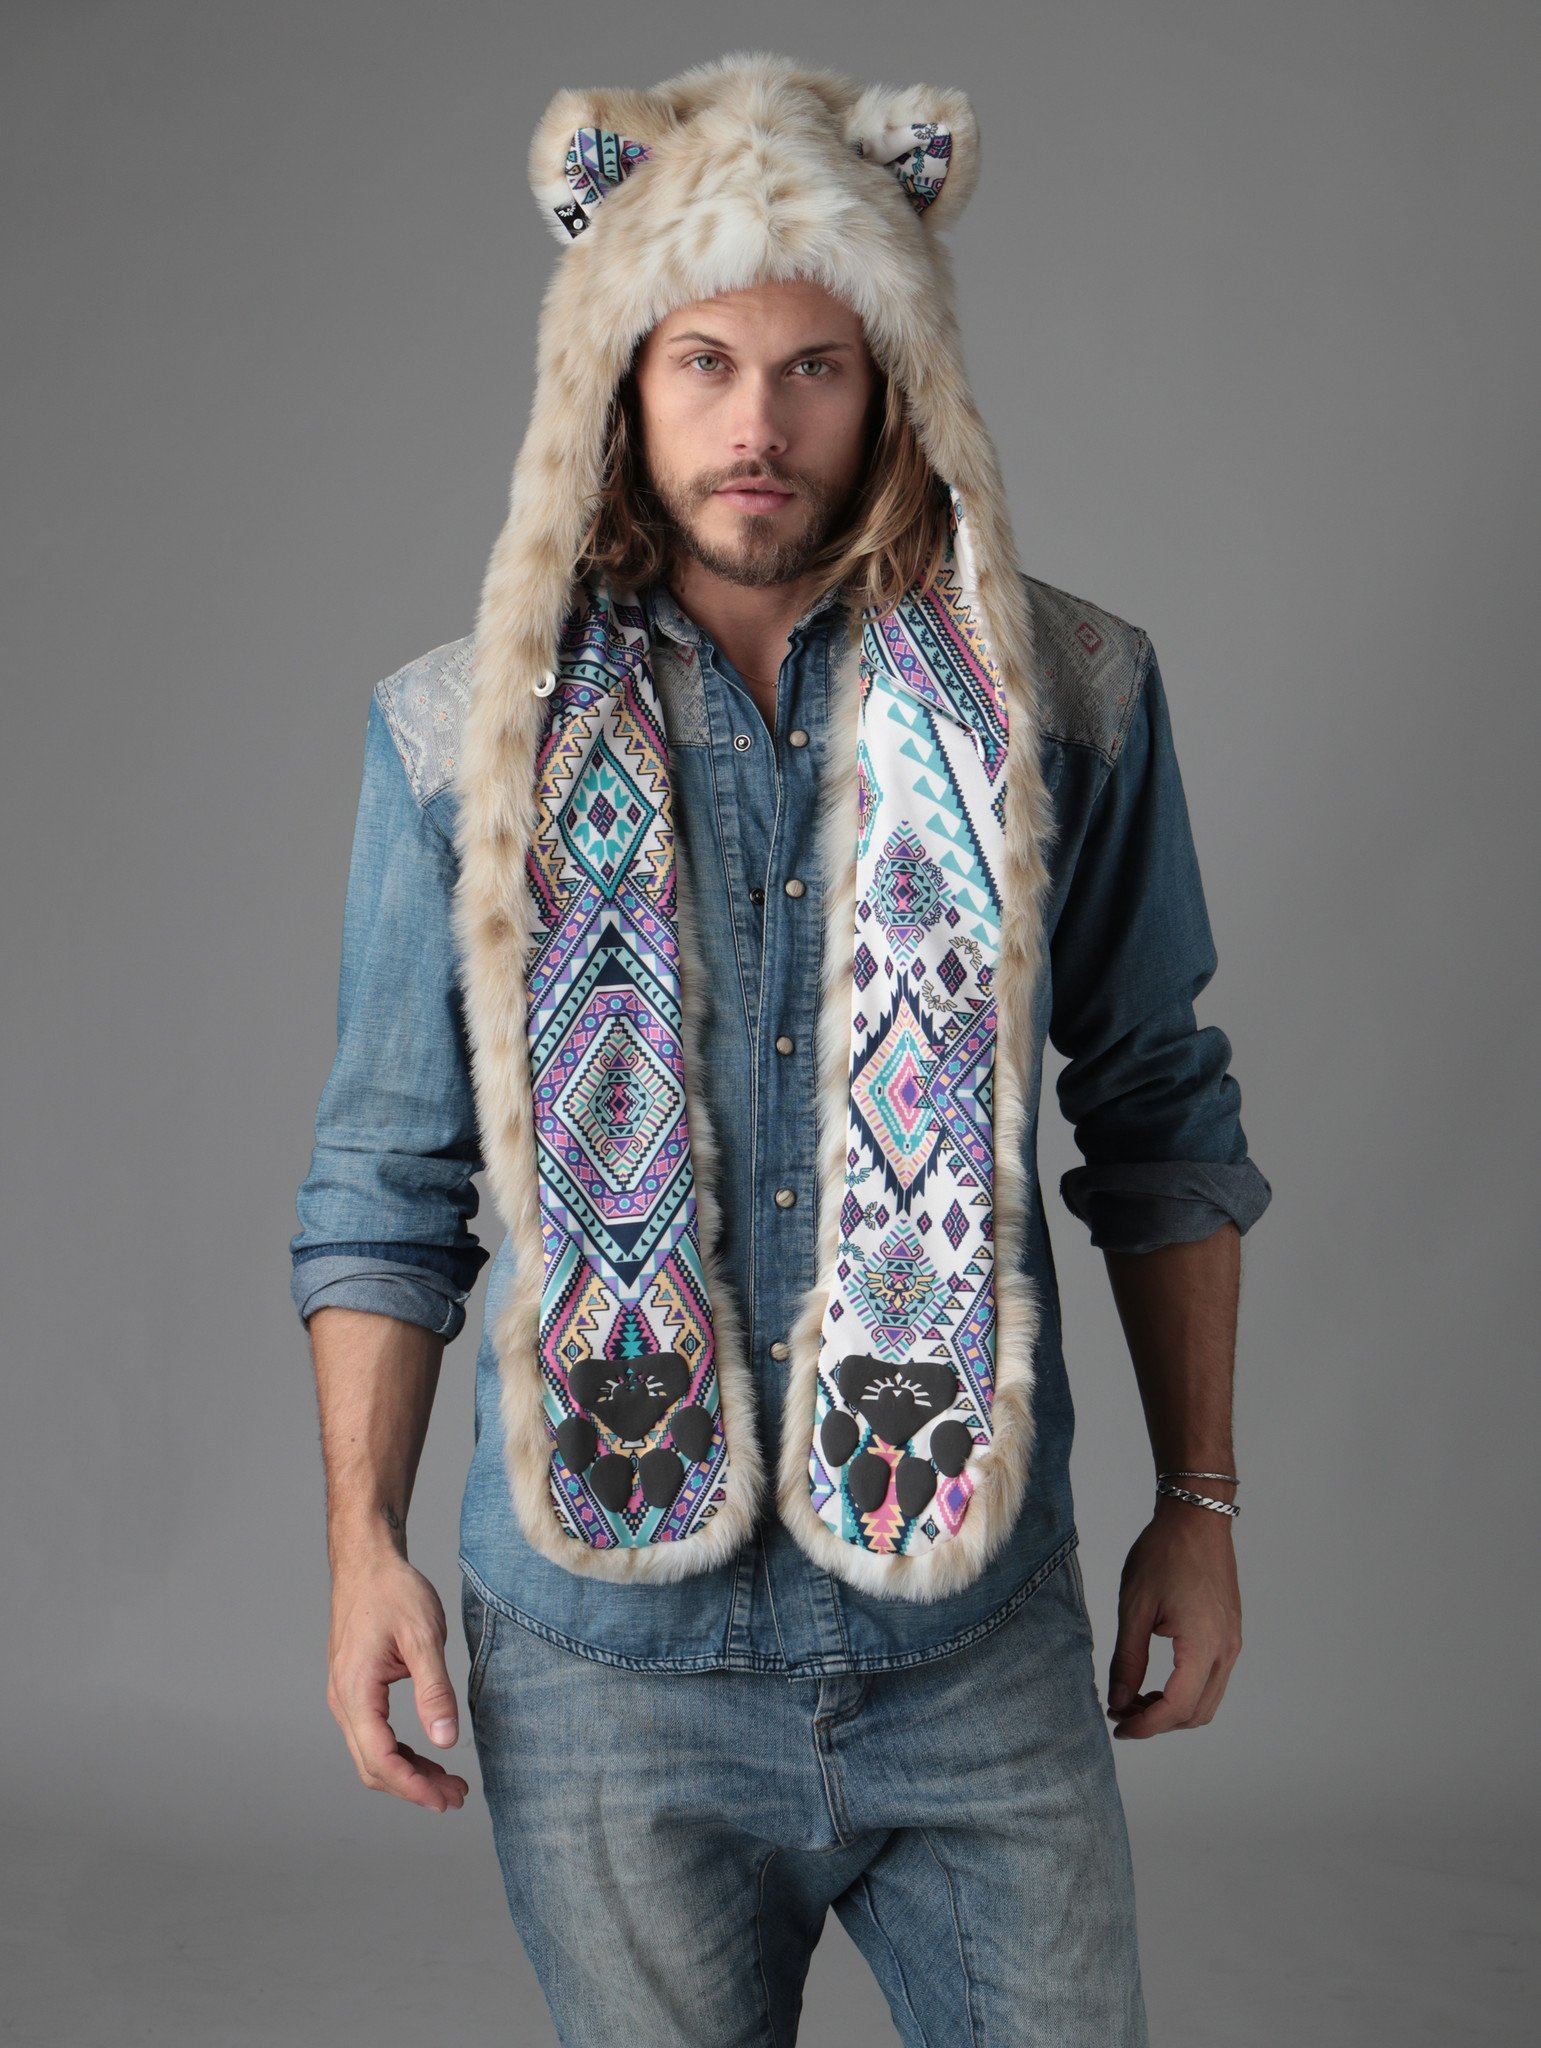 Brown and White Snow Leopard CE SpiritHood on Male